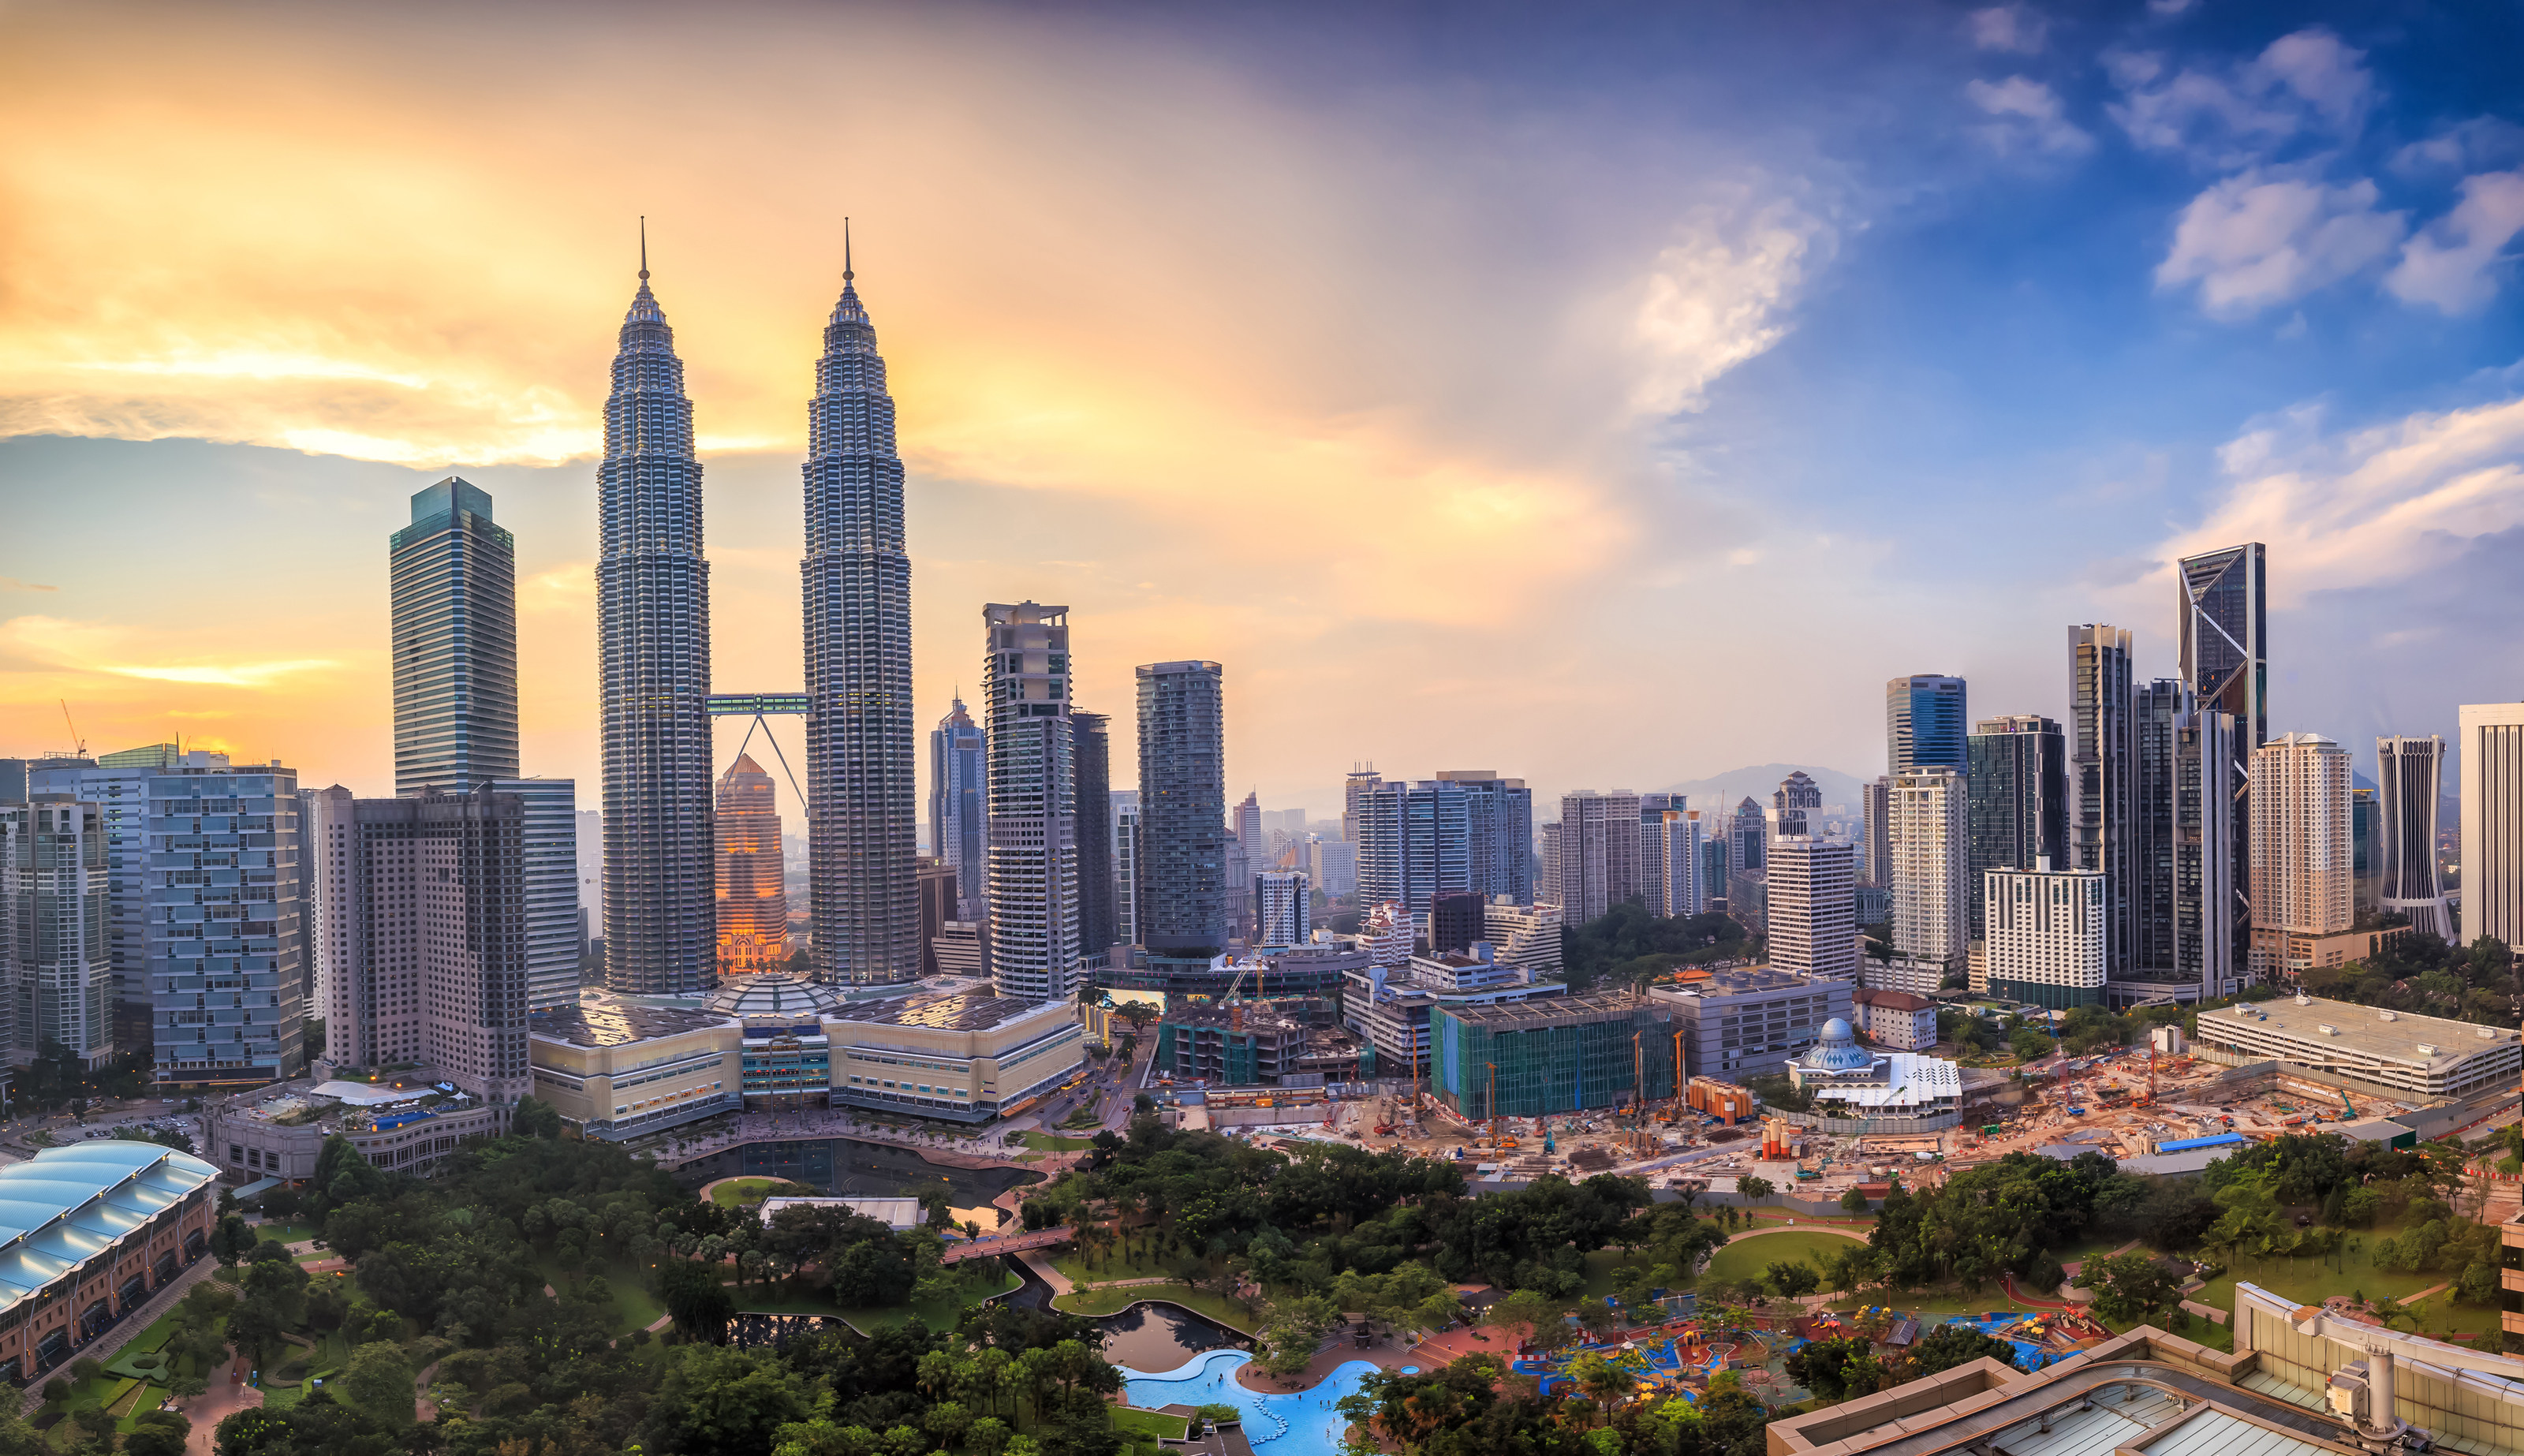 Malaysia’s capital city Kuala Lumpur is located in Selangor, the country’s wealthiest and most industrialised state that has since 2008 been governed by the multiracial coalition co-founded by current Prime Minister Anwar Ibrahim. Photo: Shutterstock